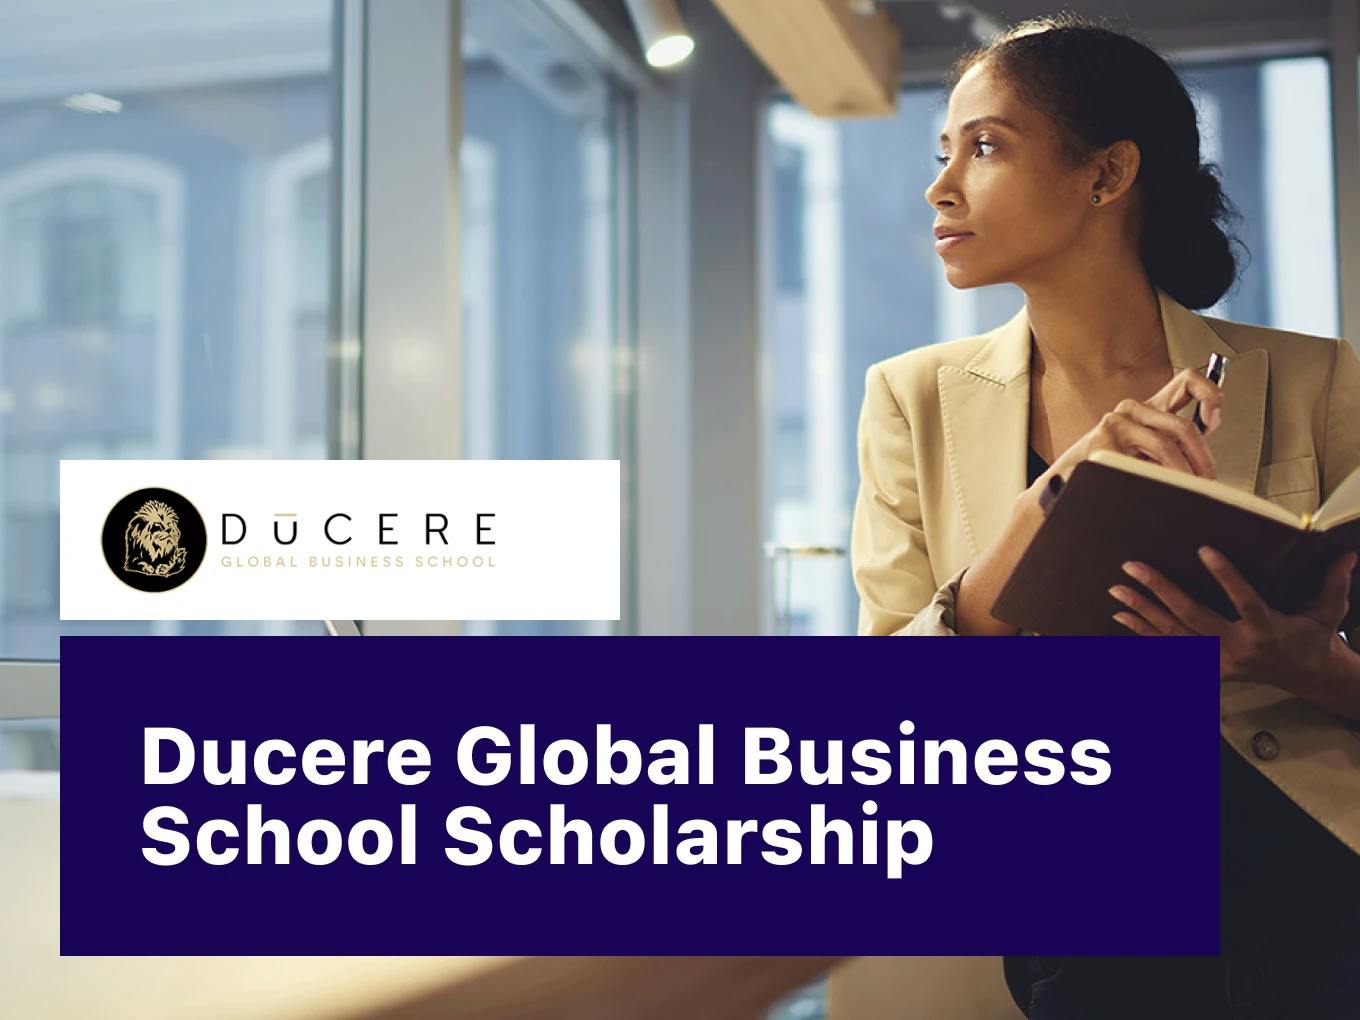 Ducere Global Business School Scholarship